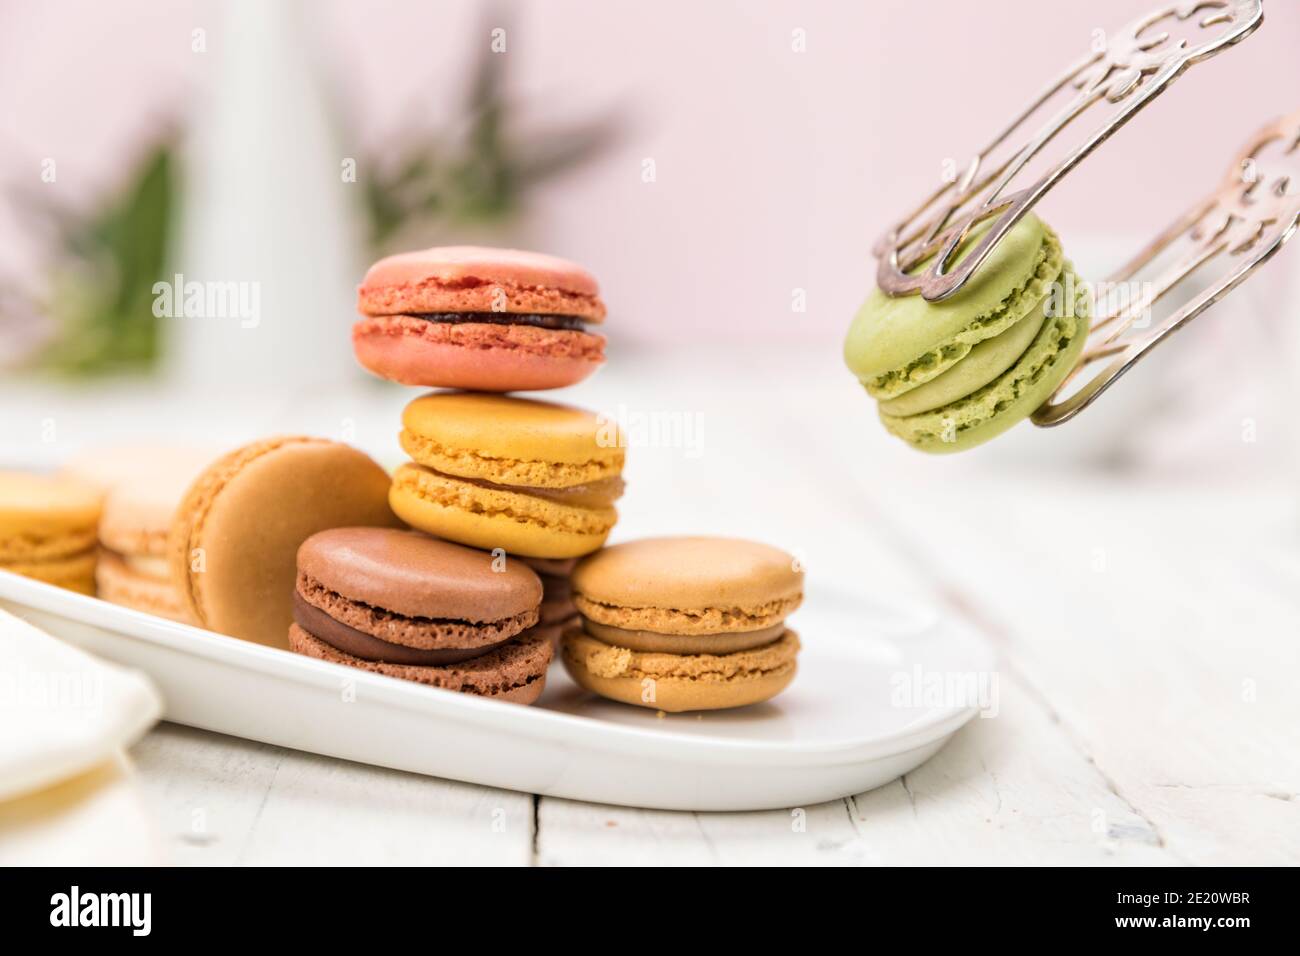 Assortment of French macarons pastry on coffee table, focus on a pistachio flavored one held up with pastry tongs, Stock Photo